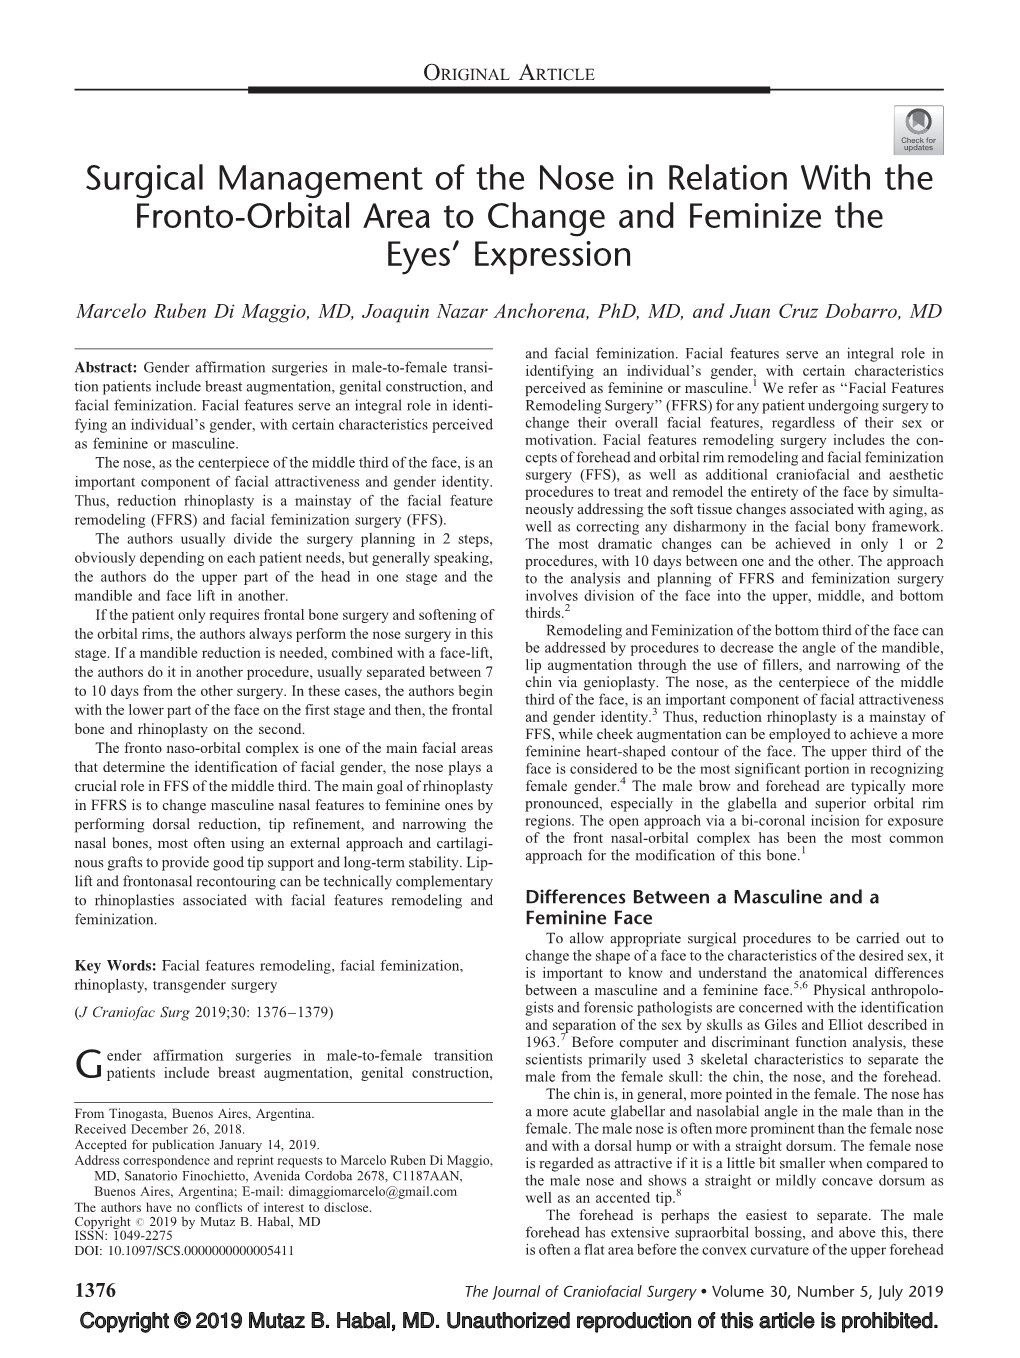 Surgical Management of the Nose in Relation with the Fronto-Orbital Area to Change and Feminize the Eyes’ Expression